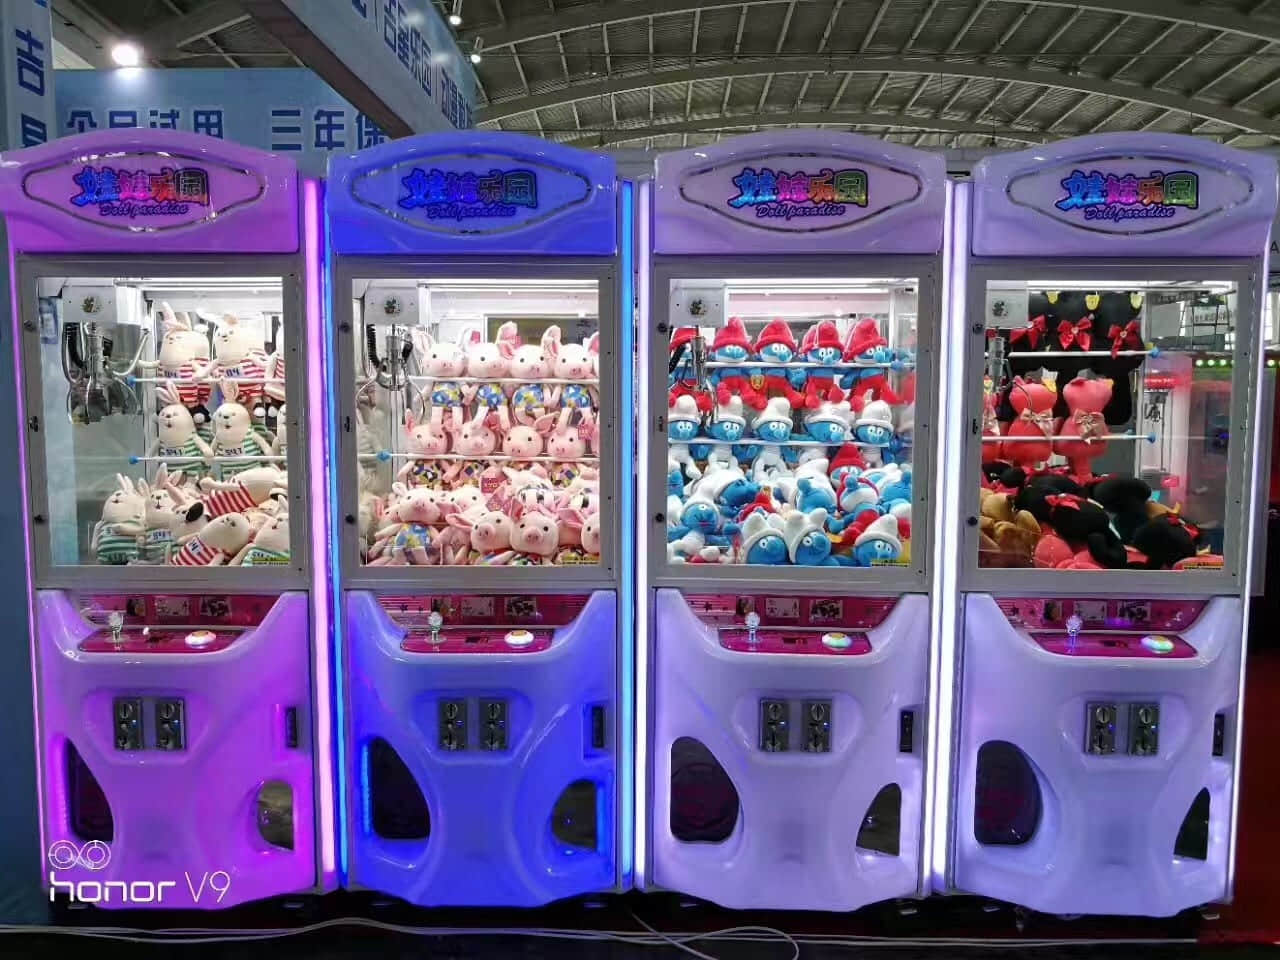 Does anyone know where I can find this claw machine? It got